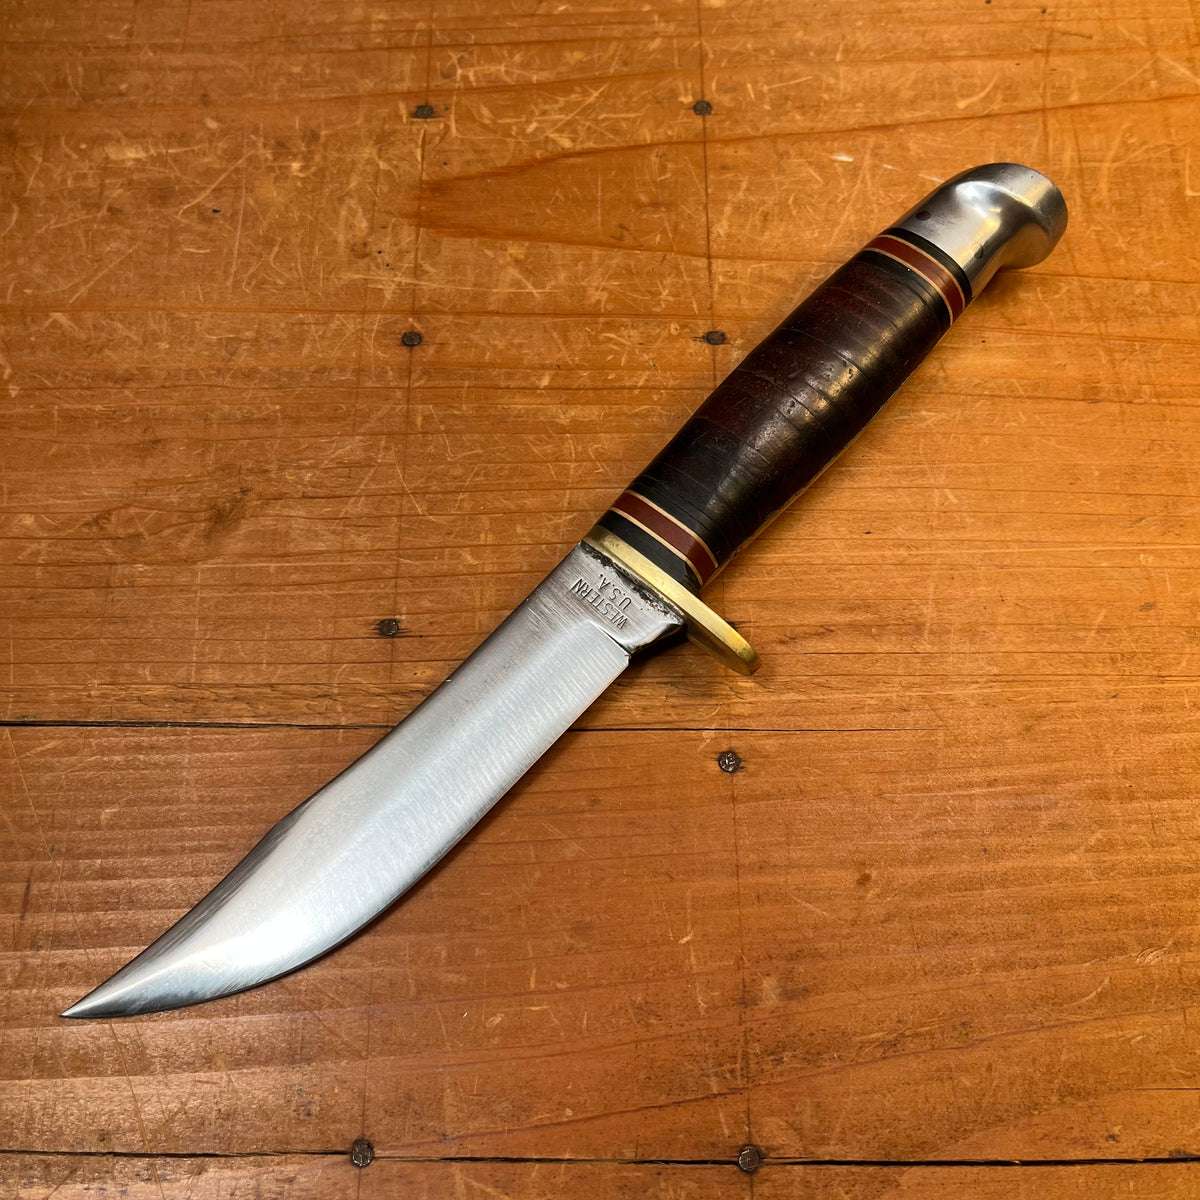 Western USA 4.5” Fixed Blade Knife Boulder Colo. 1978-84